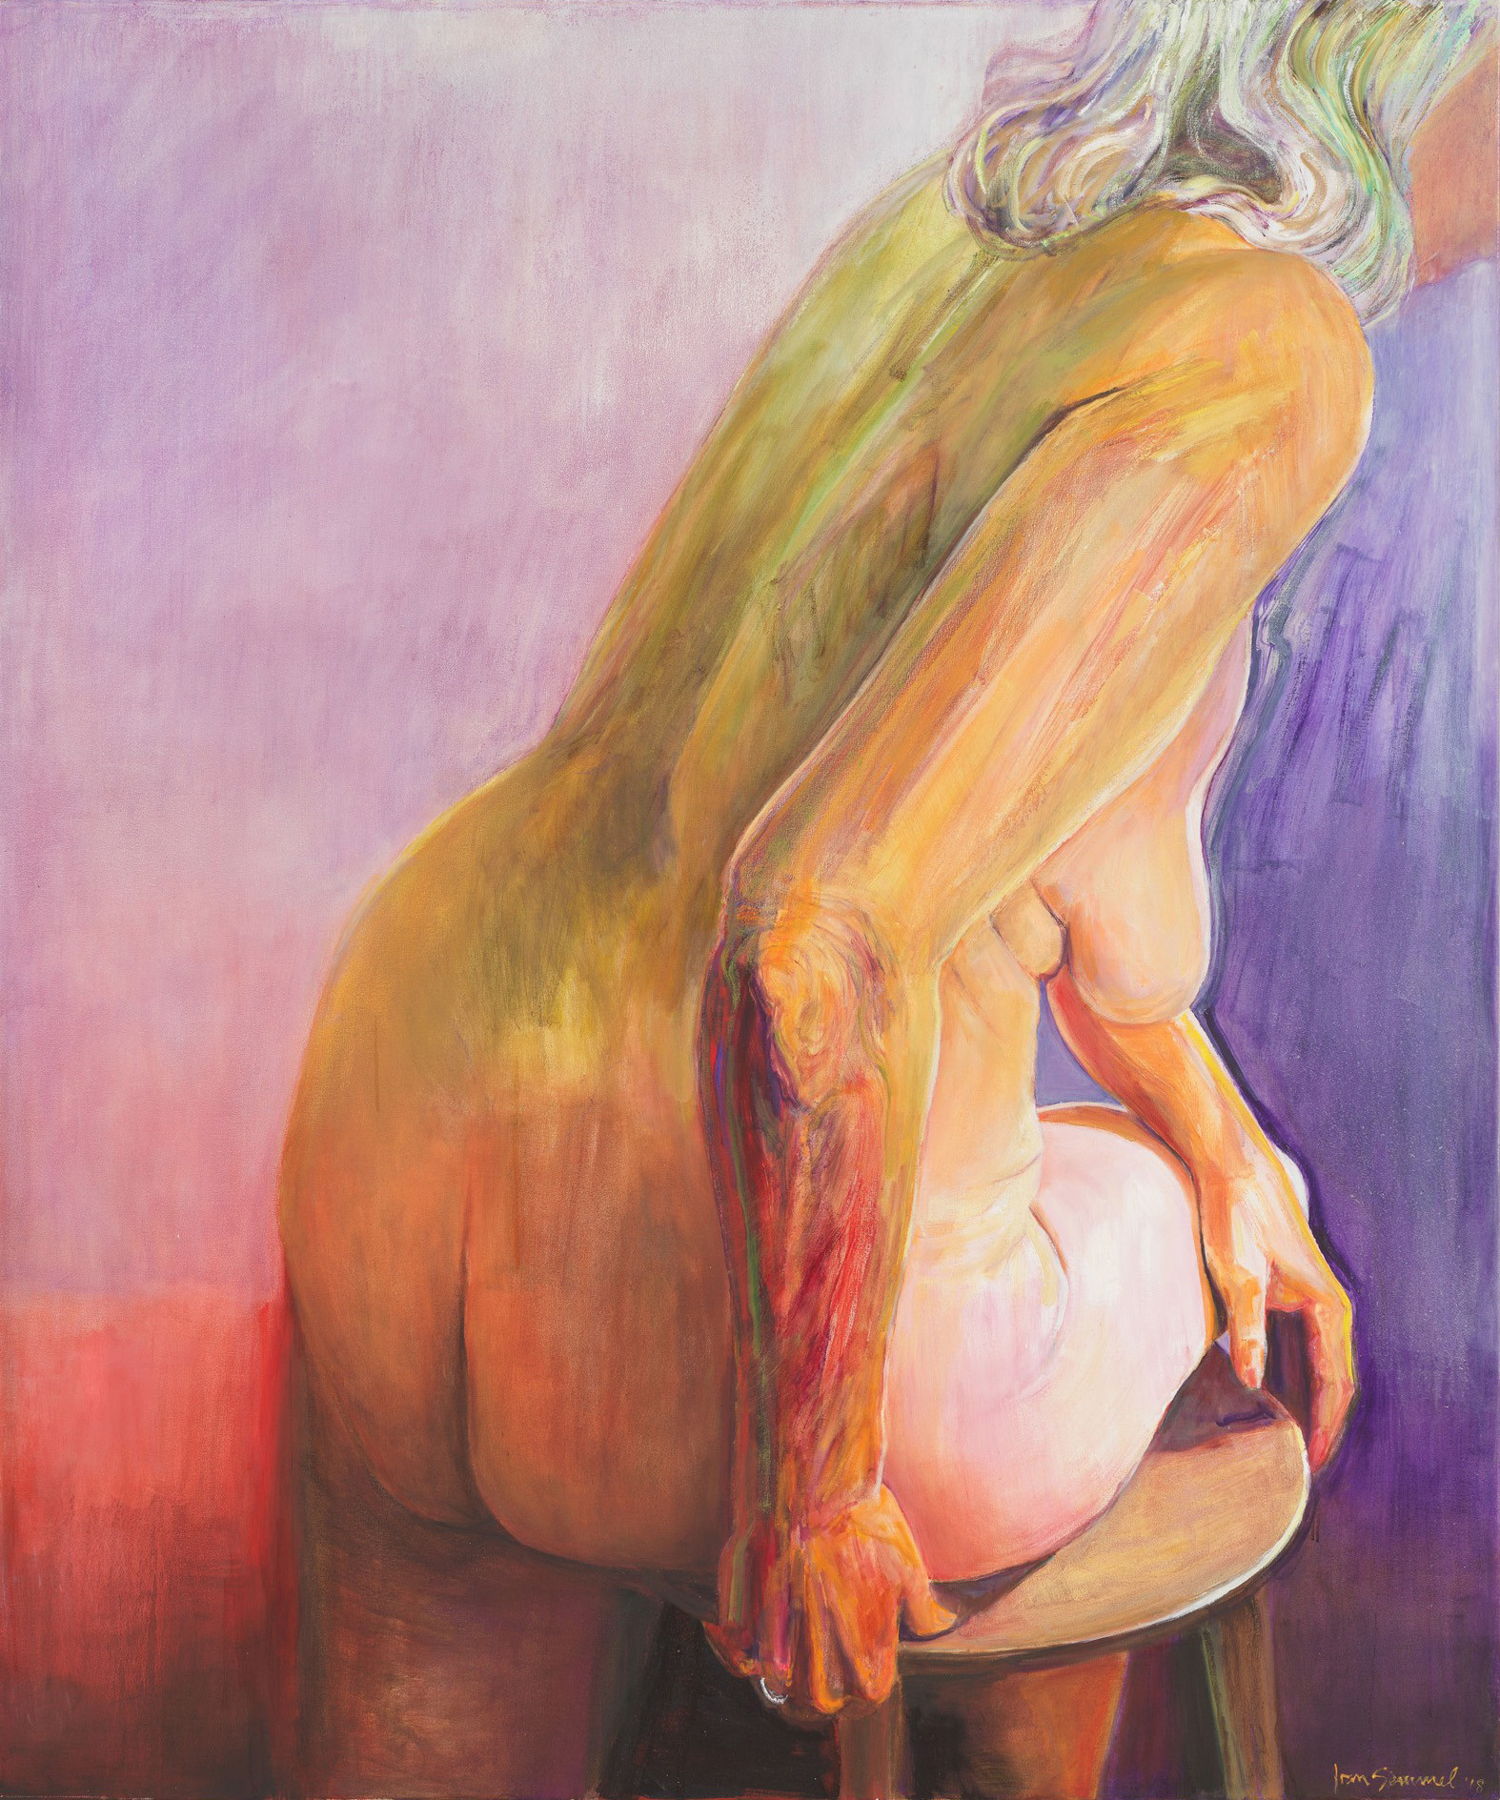 Joan Semmel, Turning, 2018 oil on canvas 182.9 × 152.4 cm, 72 × 60 in. Photo credit: Jeffrey Sturges Courtesy of the Artist and Xavier Hufkens, Brussels